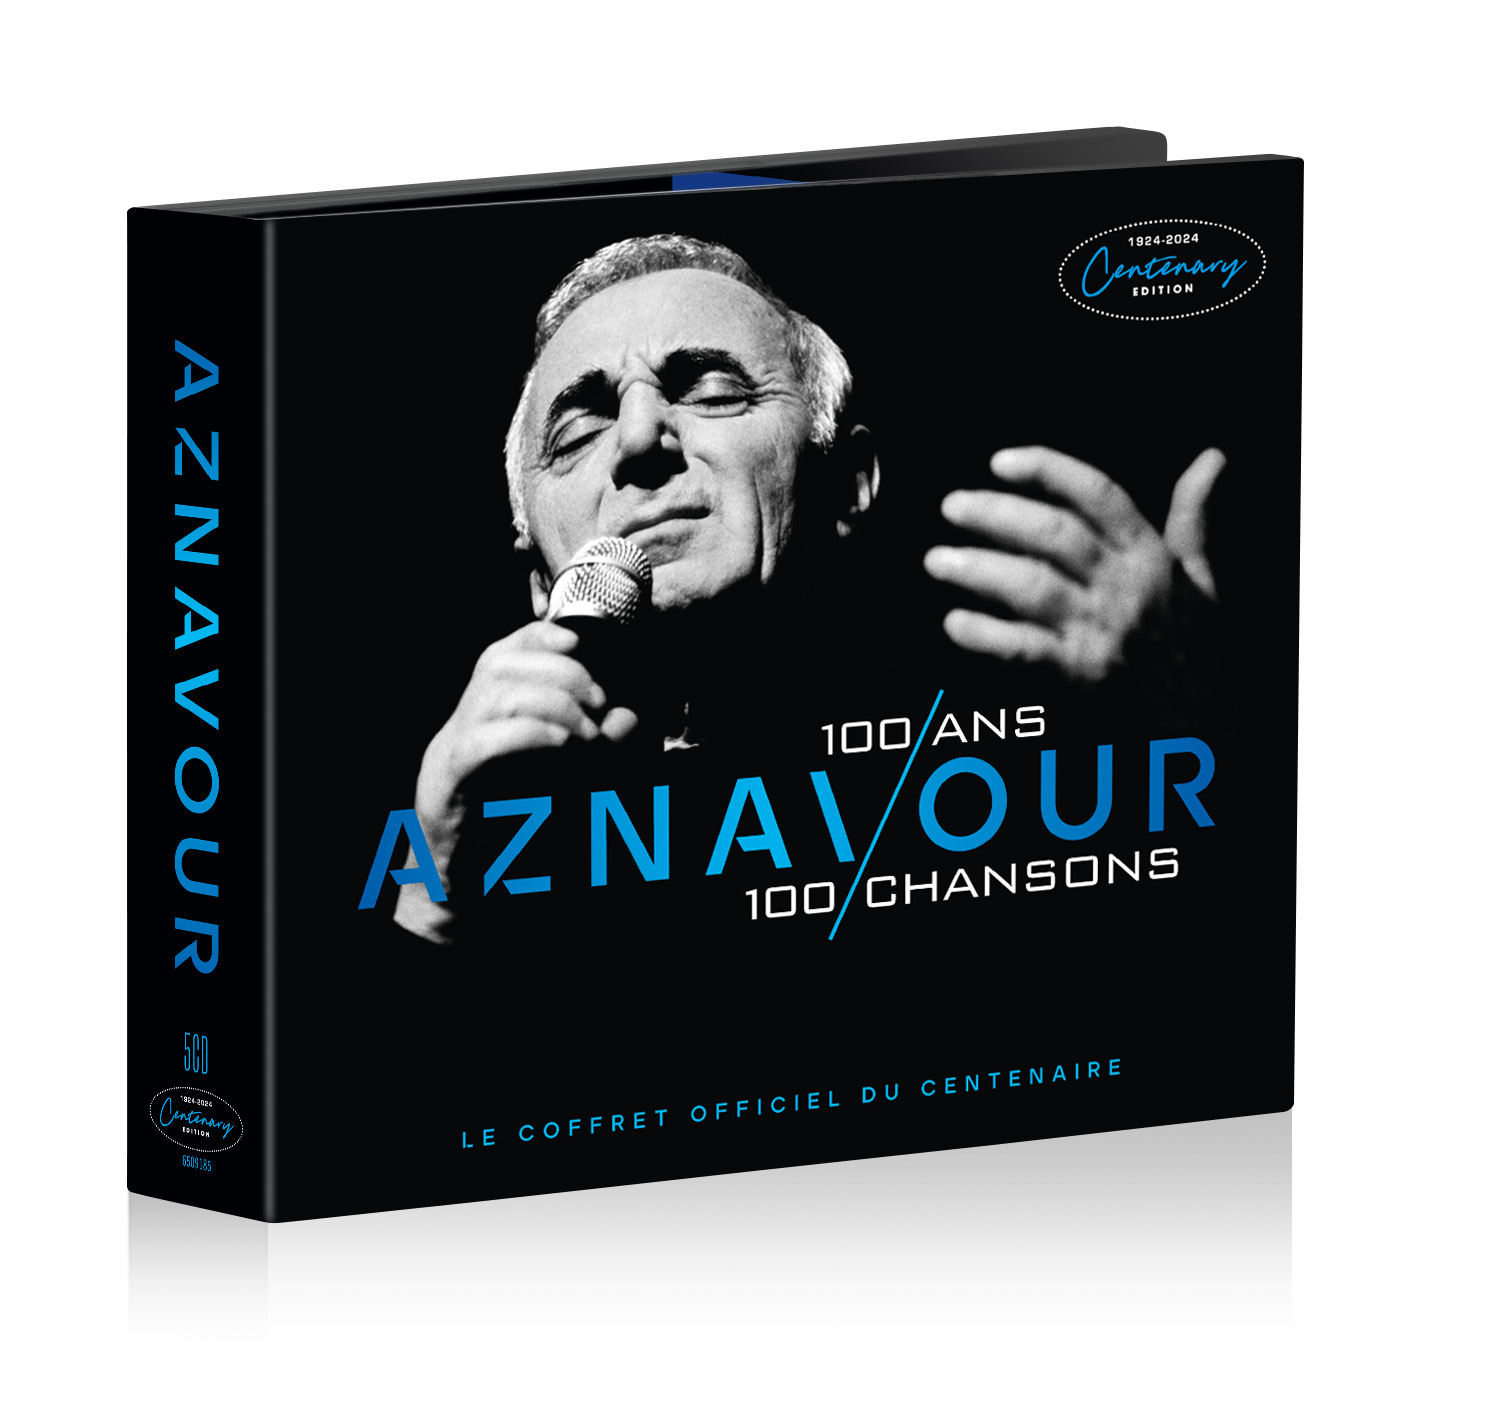 CD Shop - AZNAVOUR CHARLES 100 AN, 100 CHANSONS